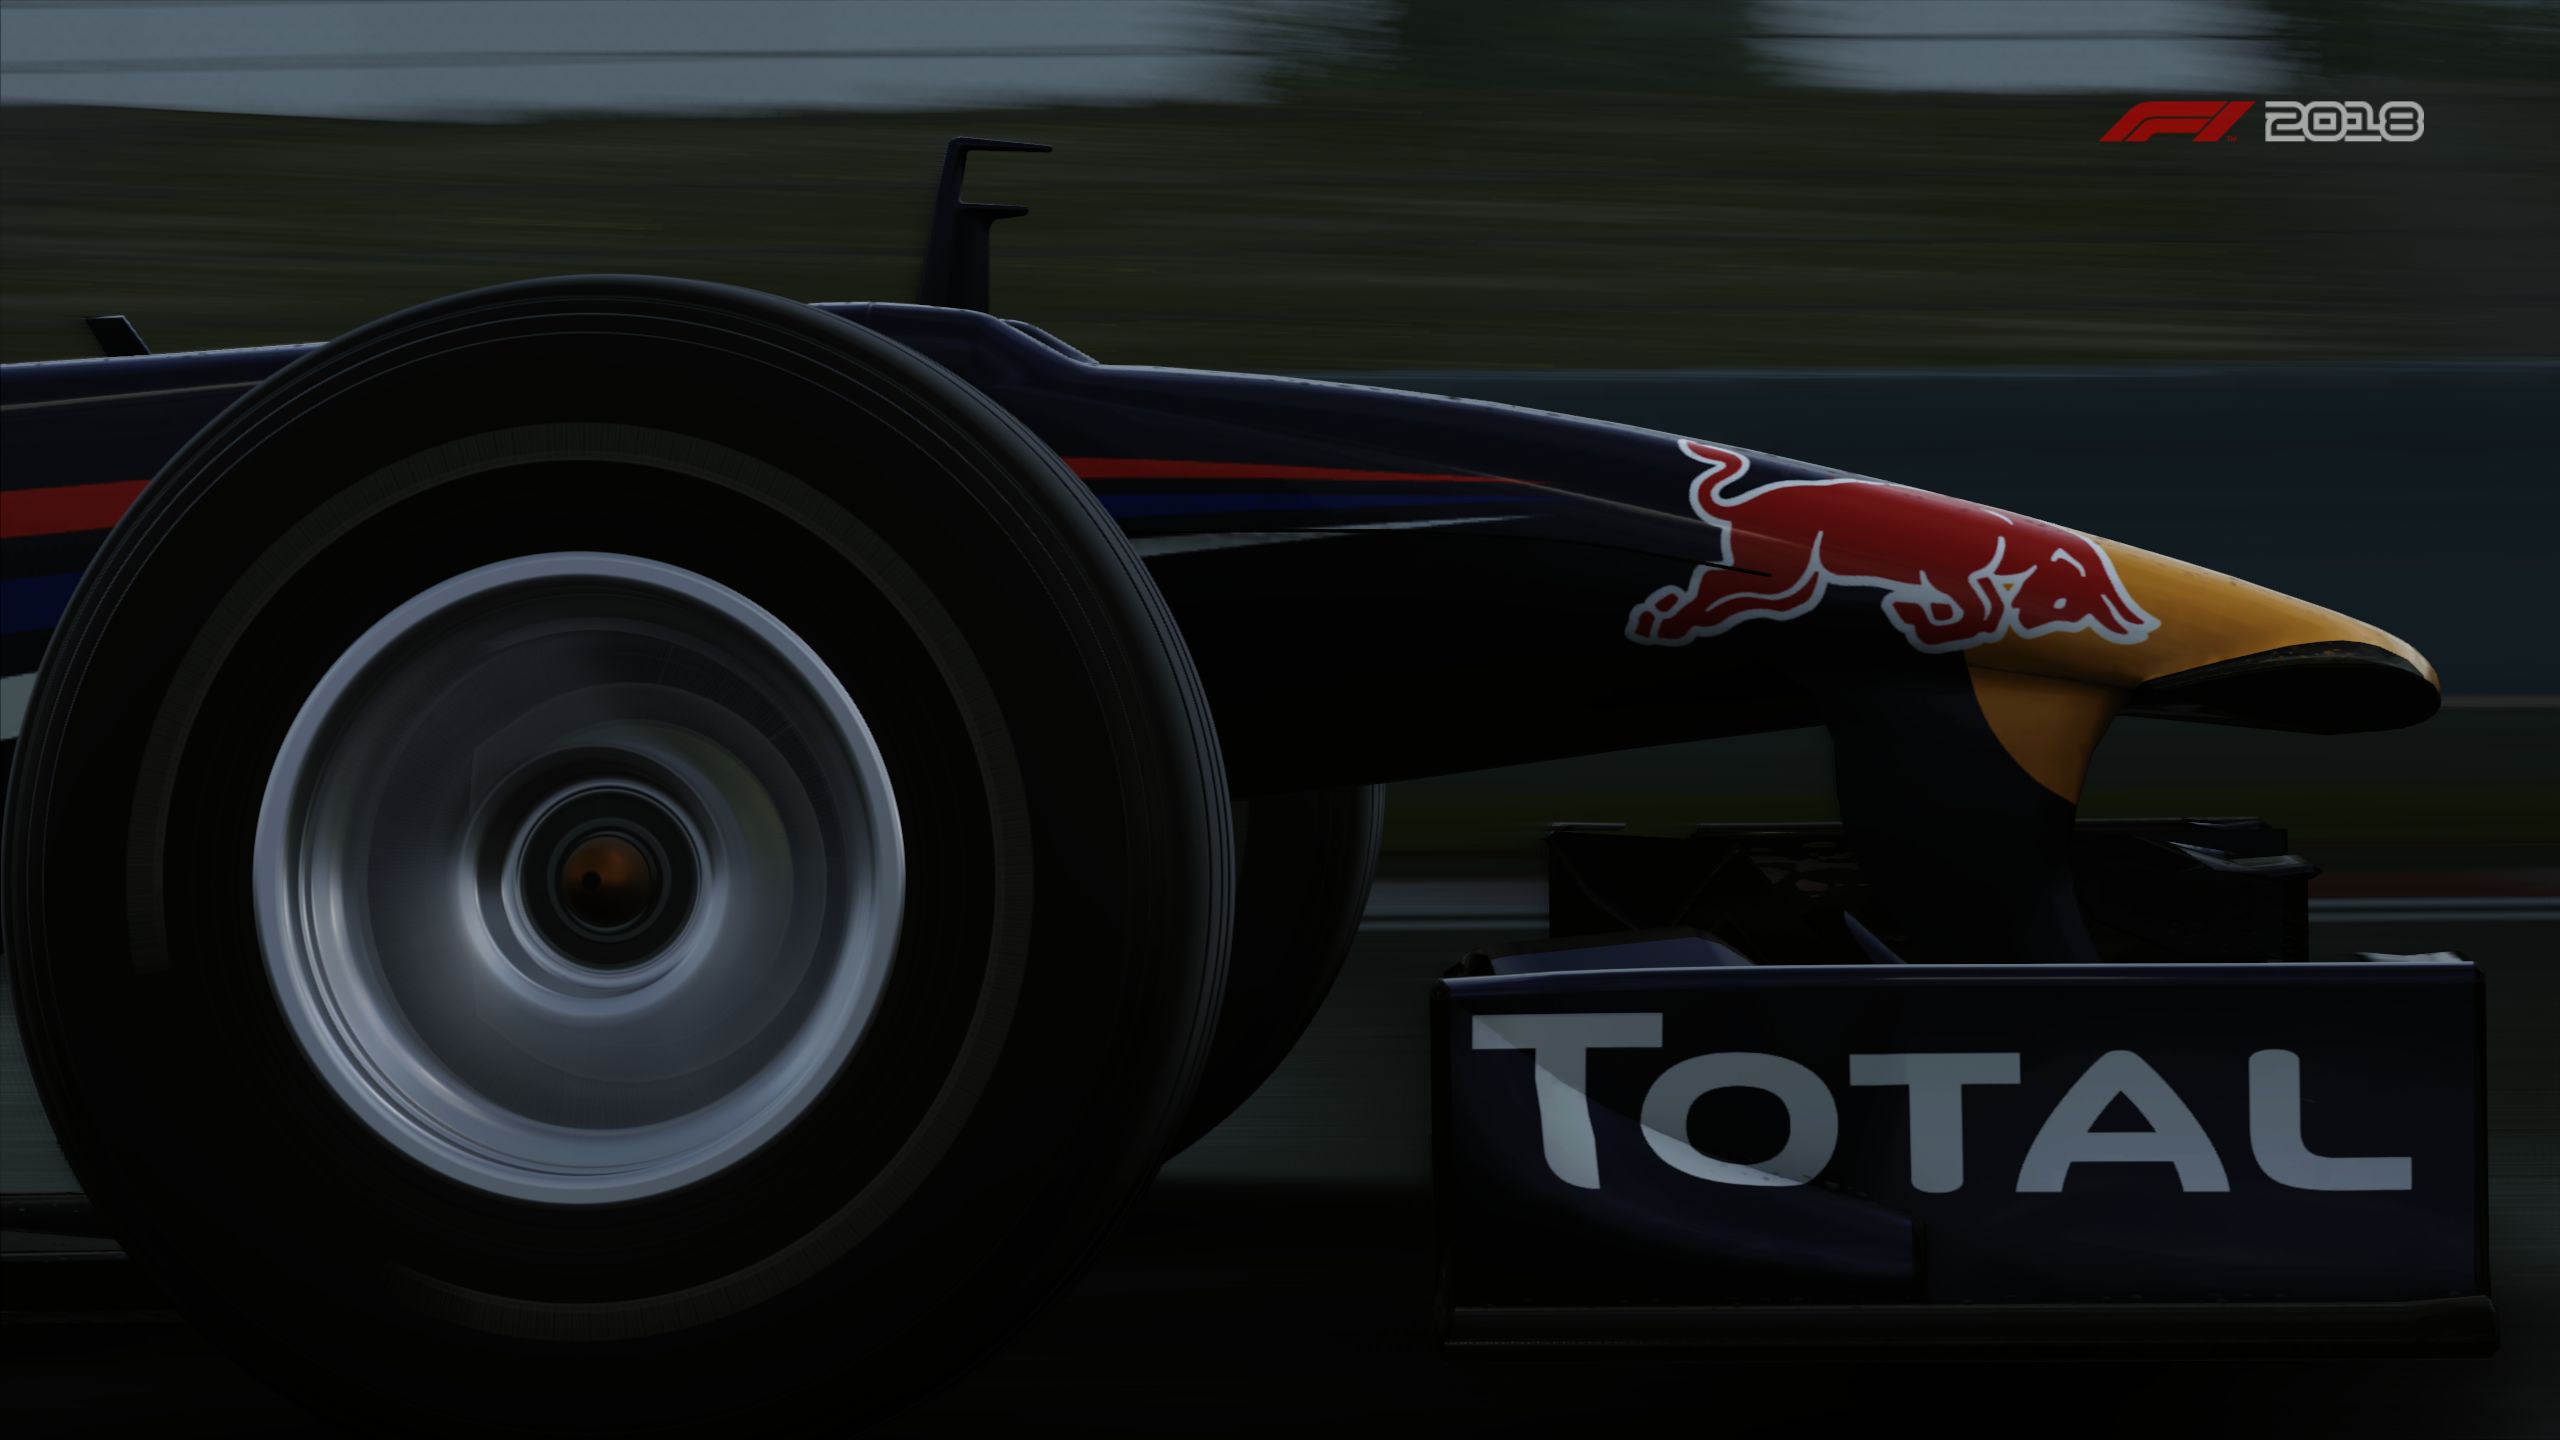 video game, f1 2018, formula 1, red bull rb6, red bull, vehicle